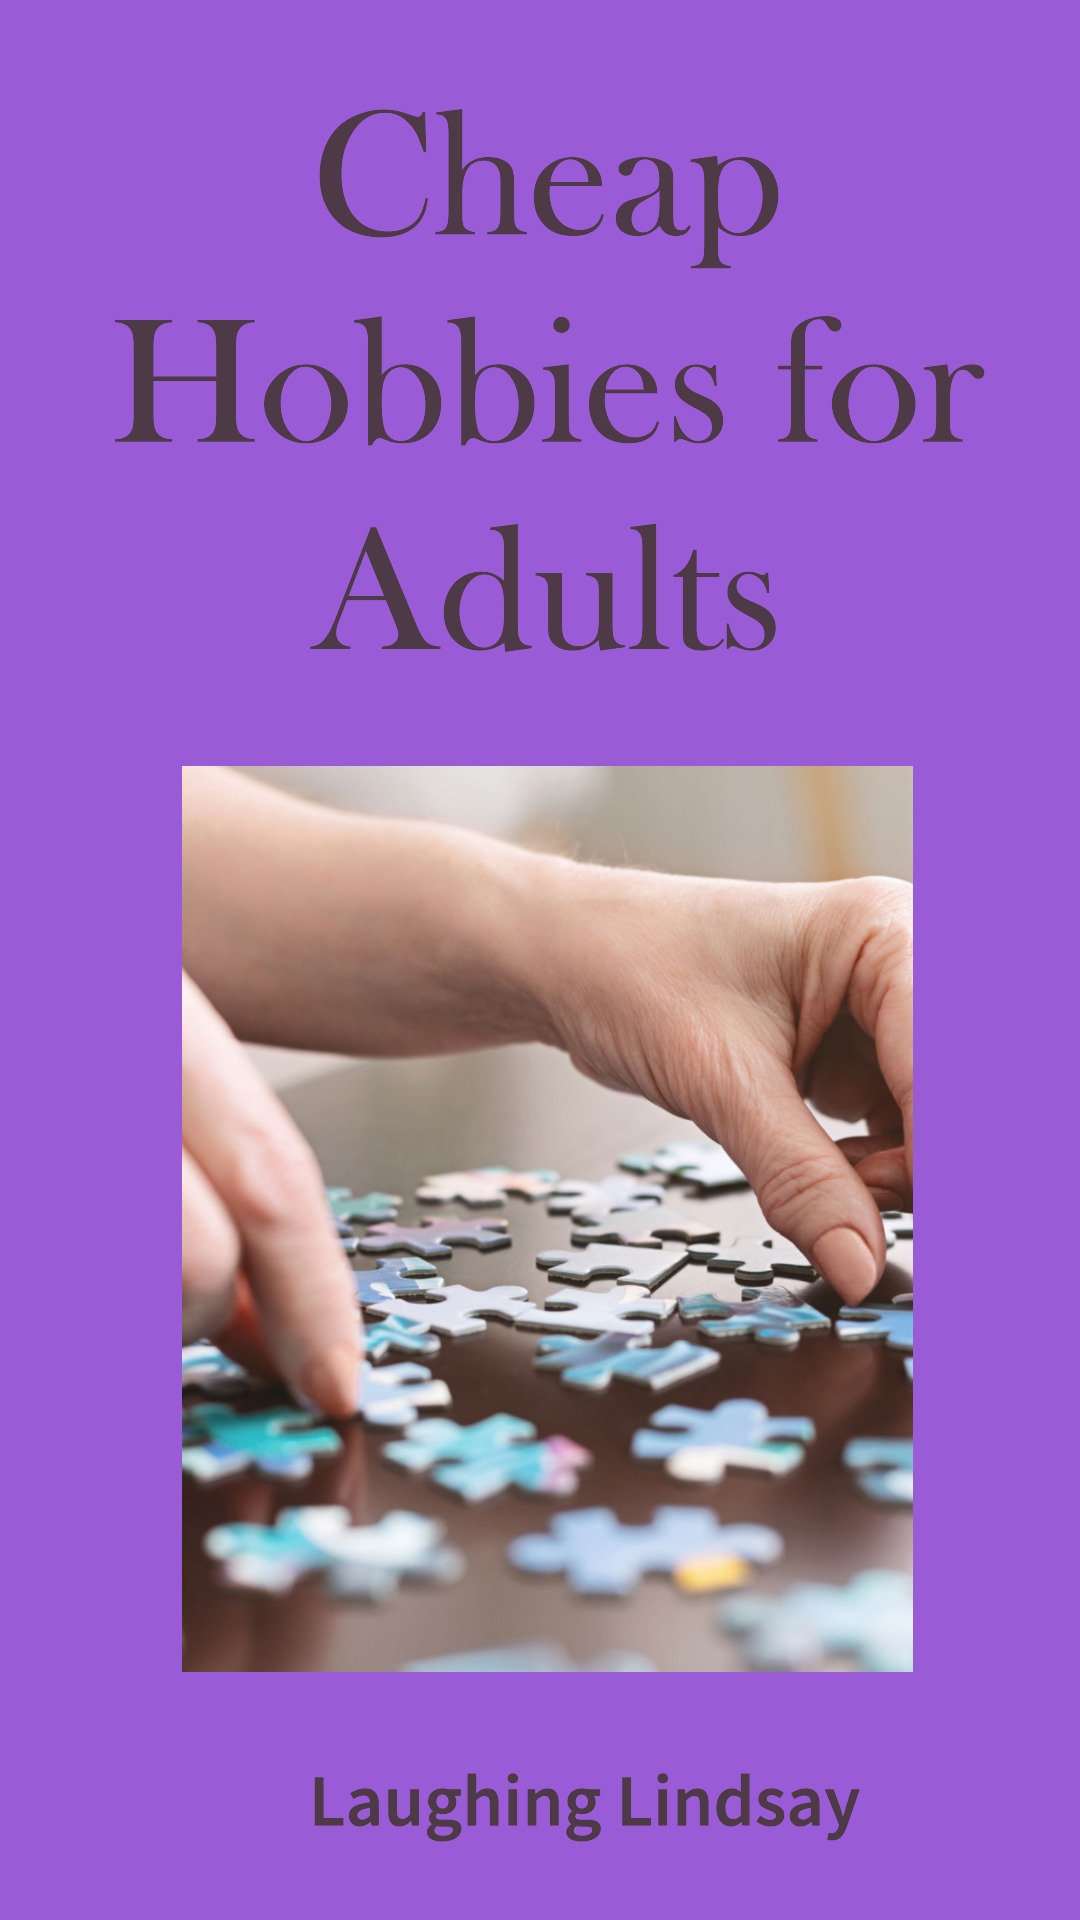 Cheap Hobbies for Adults - Laughing Lindsay